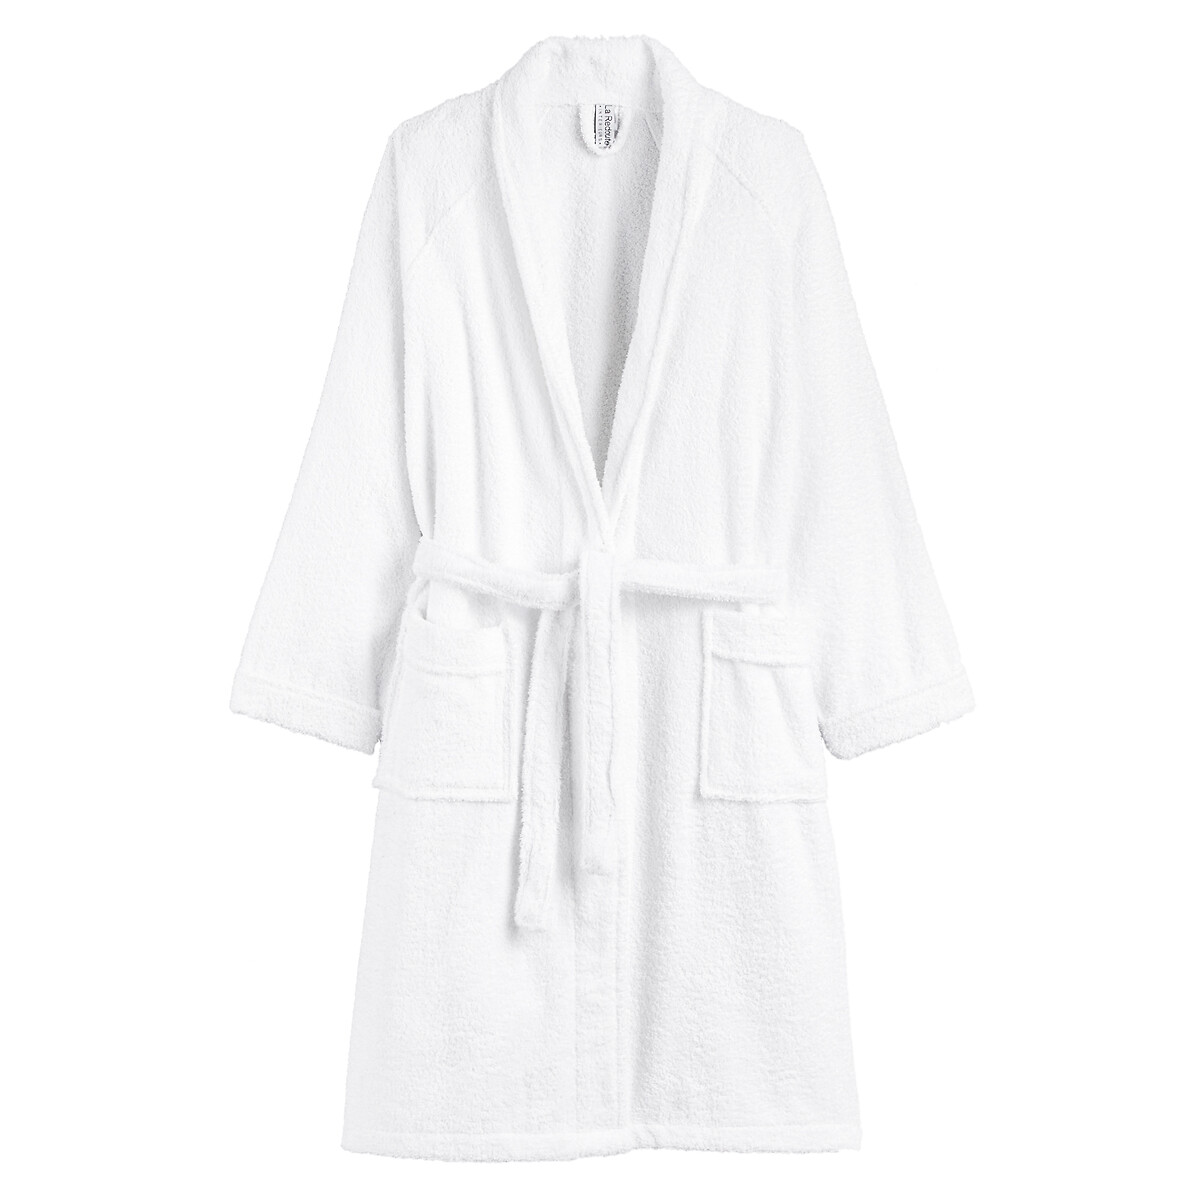 Cotton Kimono style dressing kids dressing gowns. Made from 100% cotton. –  ZinsUK